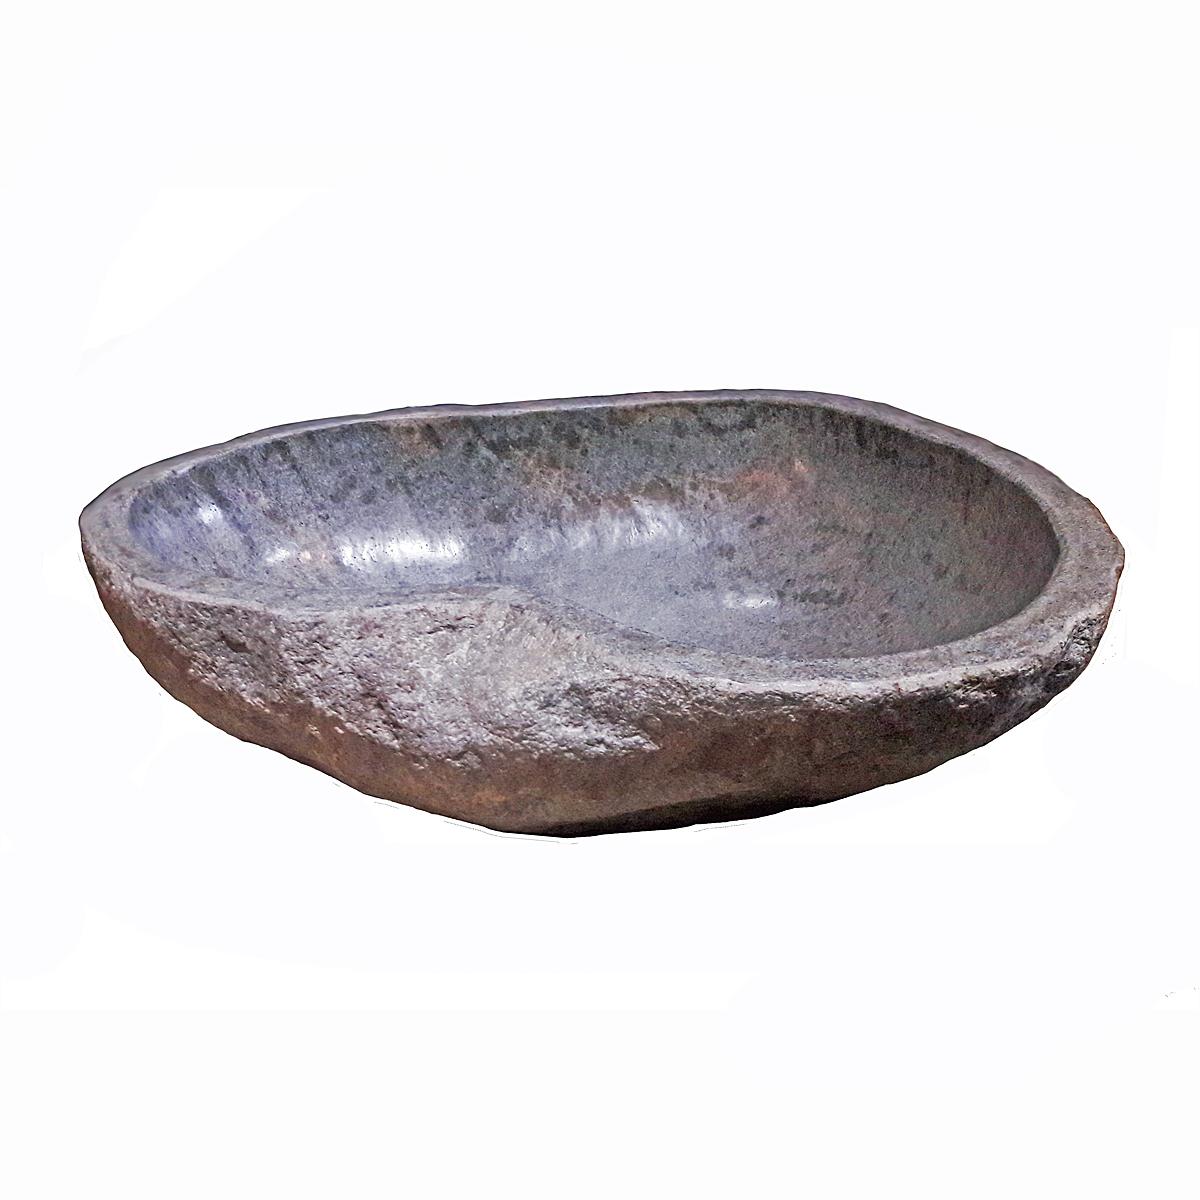 Hand-Carved River Stone Basin or Sink from Indonesia